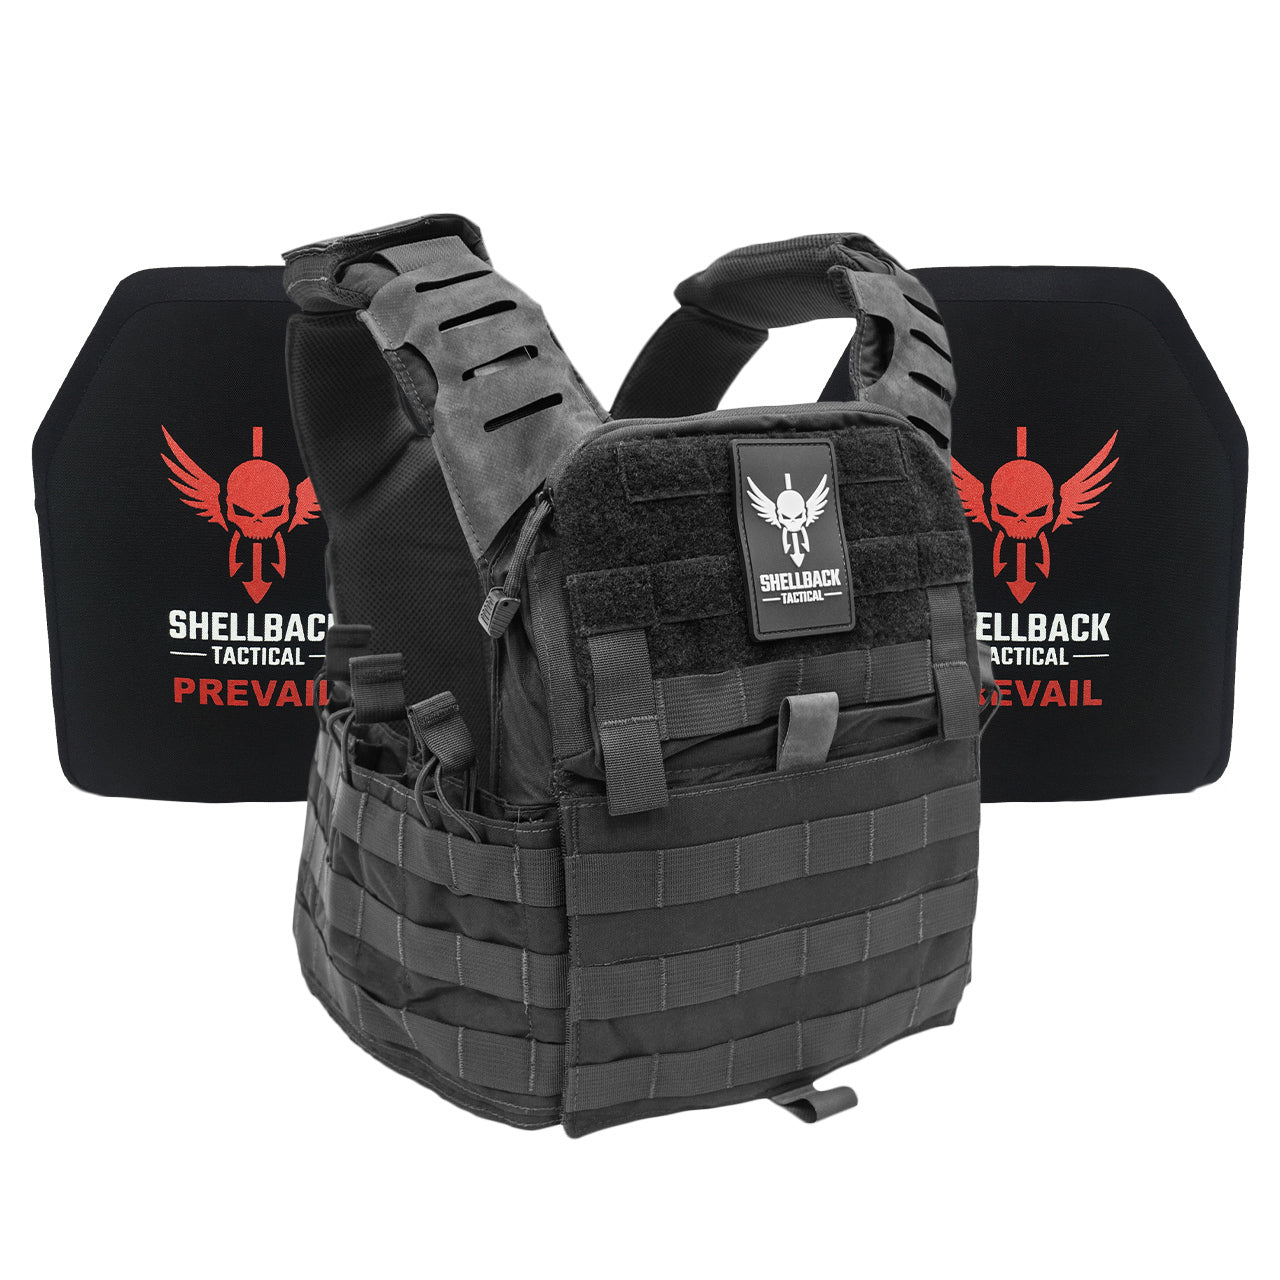 A Shellback Tactical Banshee Elite 2.0 Active Shooter Kit with Level III Single Curve 10 x 12 Hard Armor plate carrier with a red and black logo.